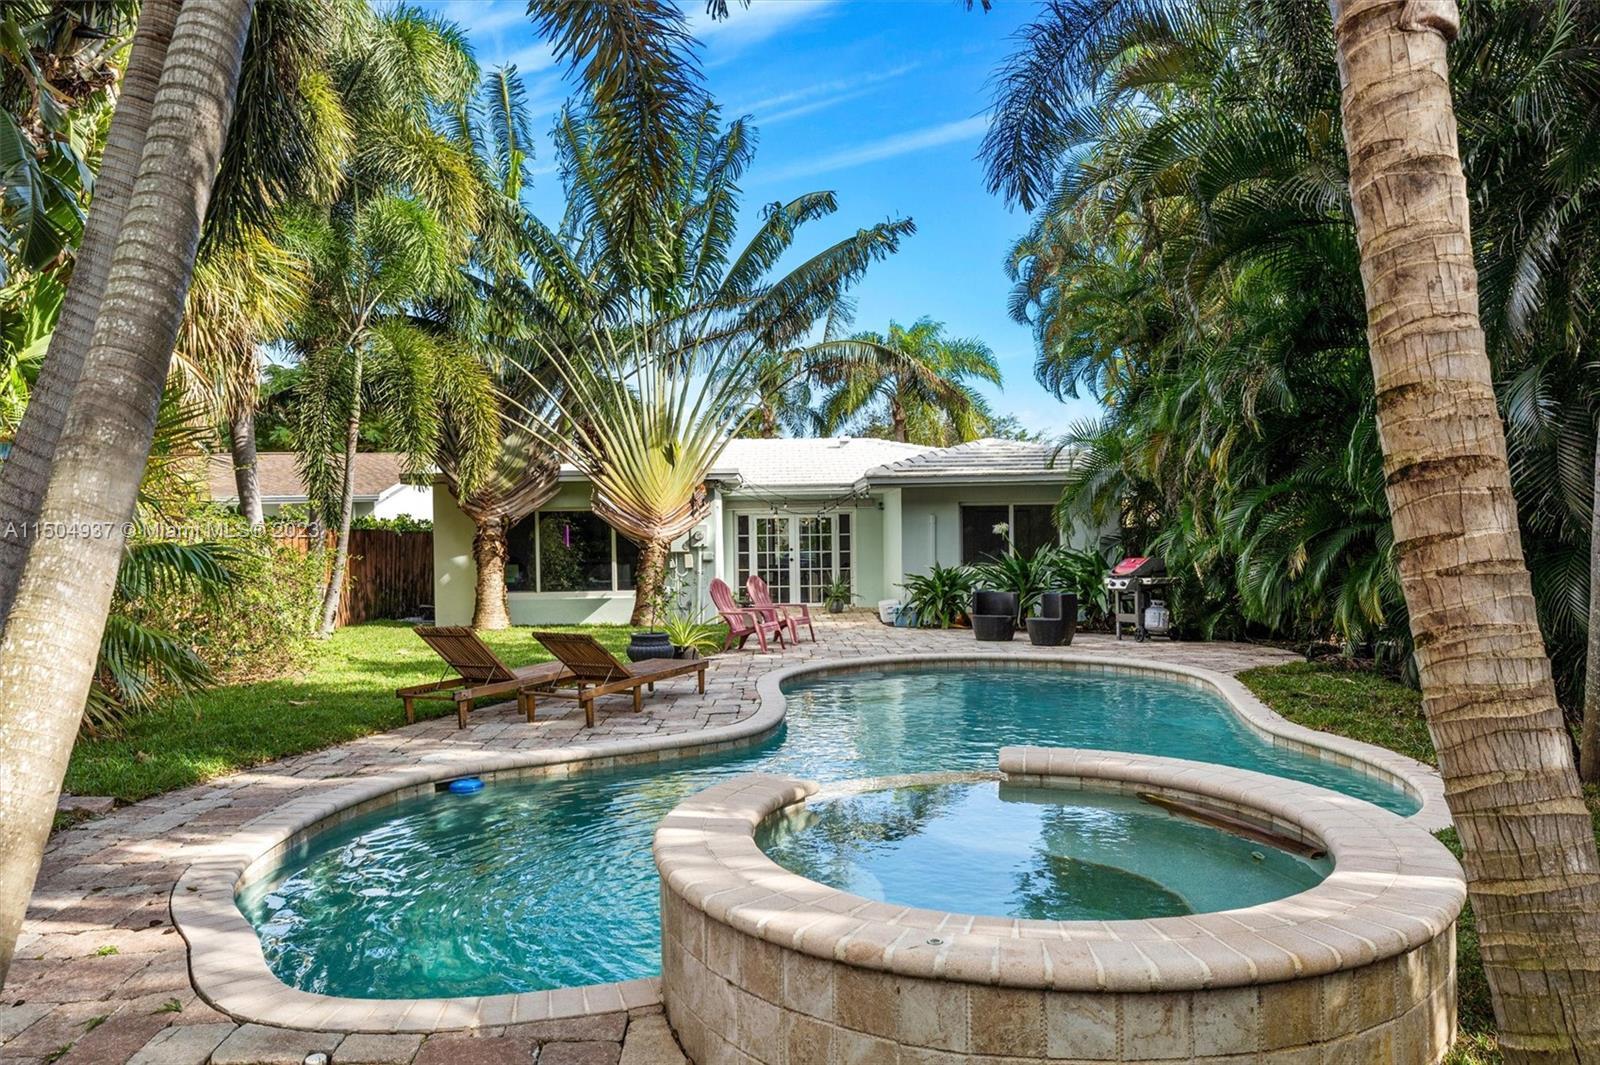 Key West-style home in Lake Worth Beach's historic district. This cozy 3 bedroom, 2 bath residence o